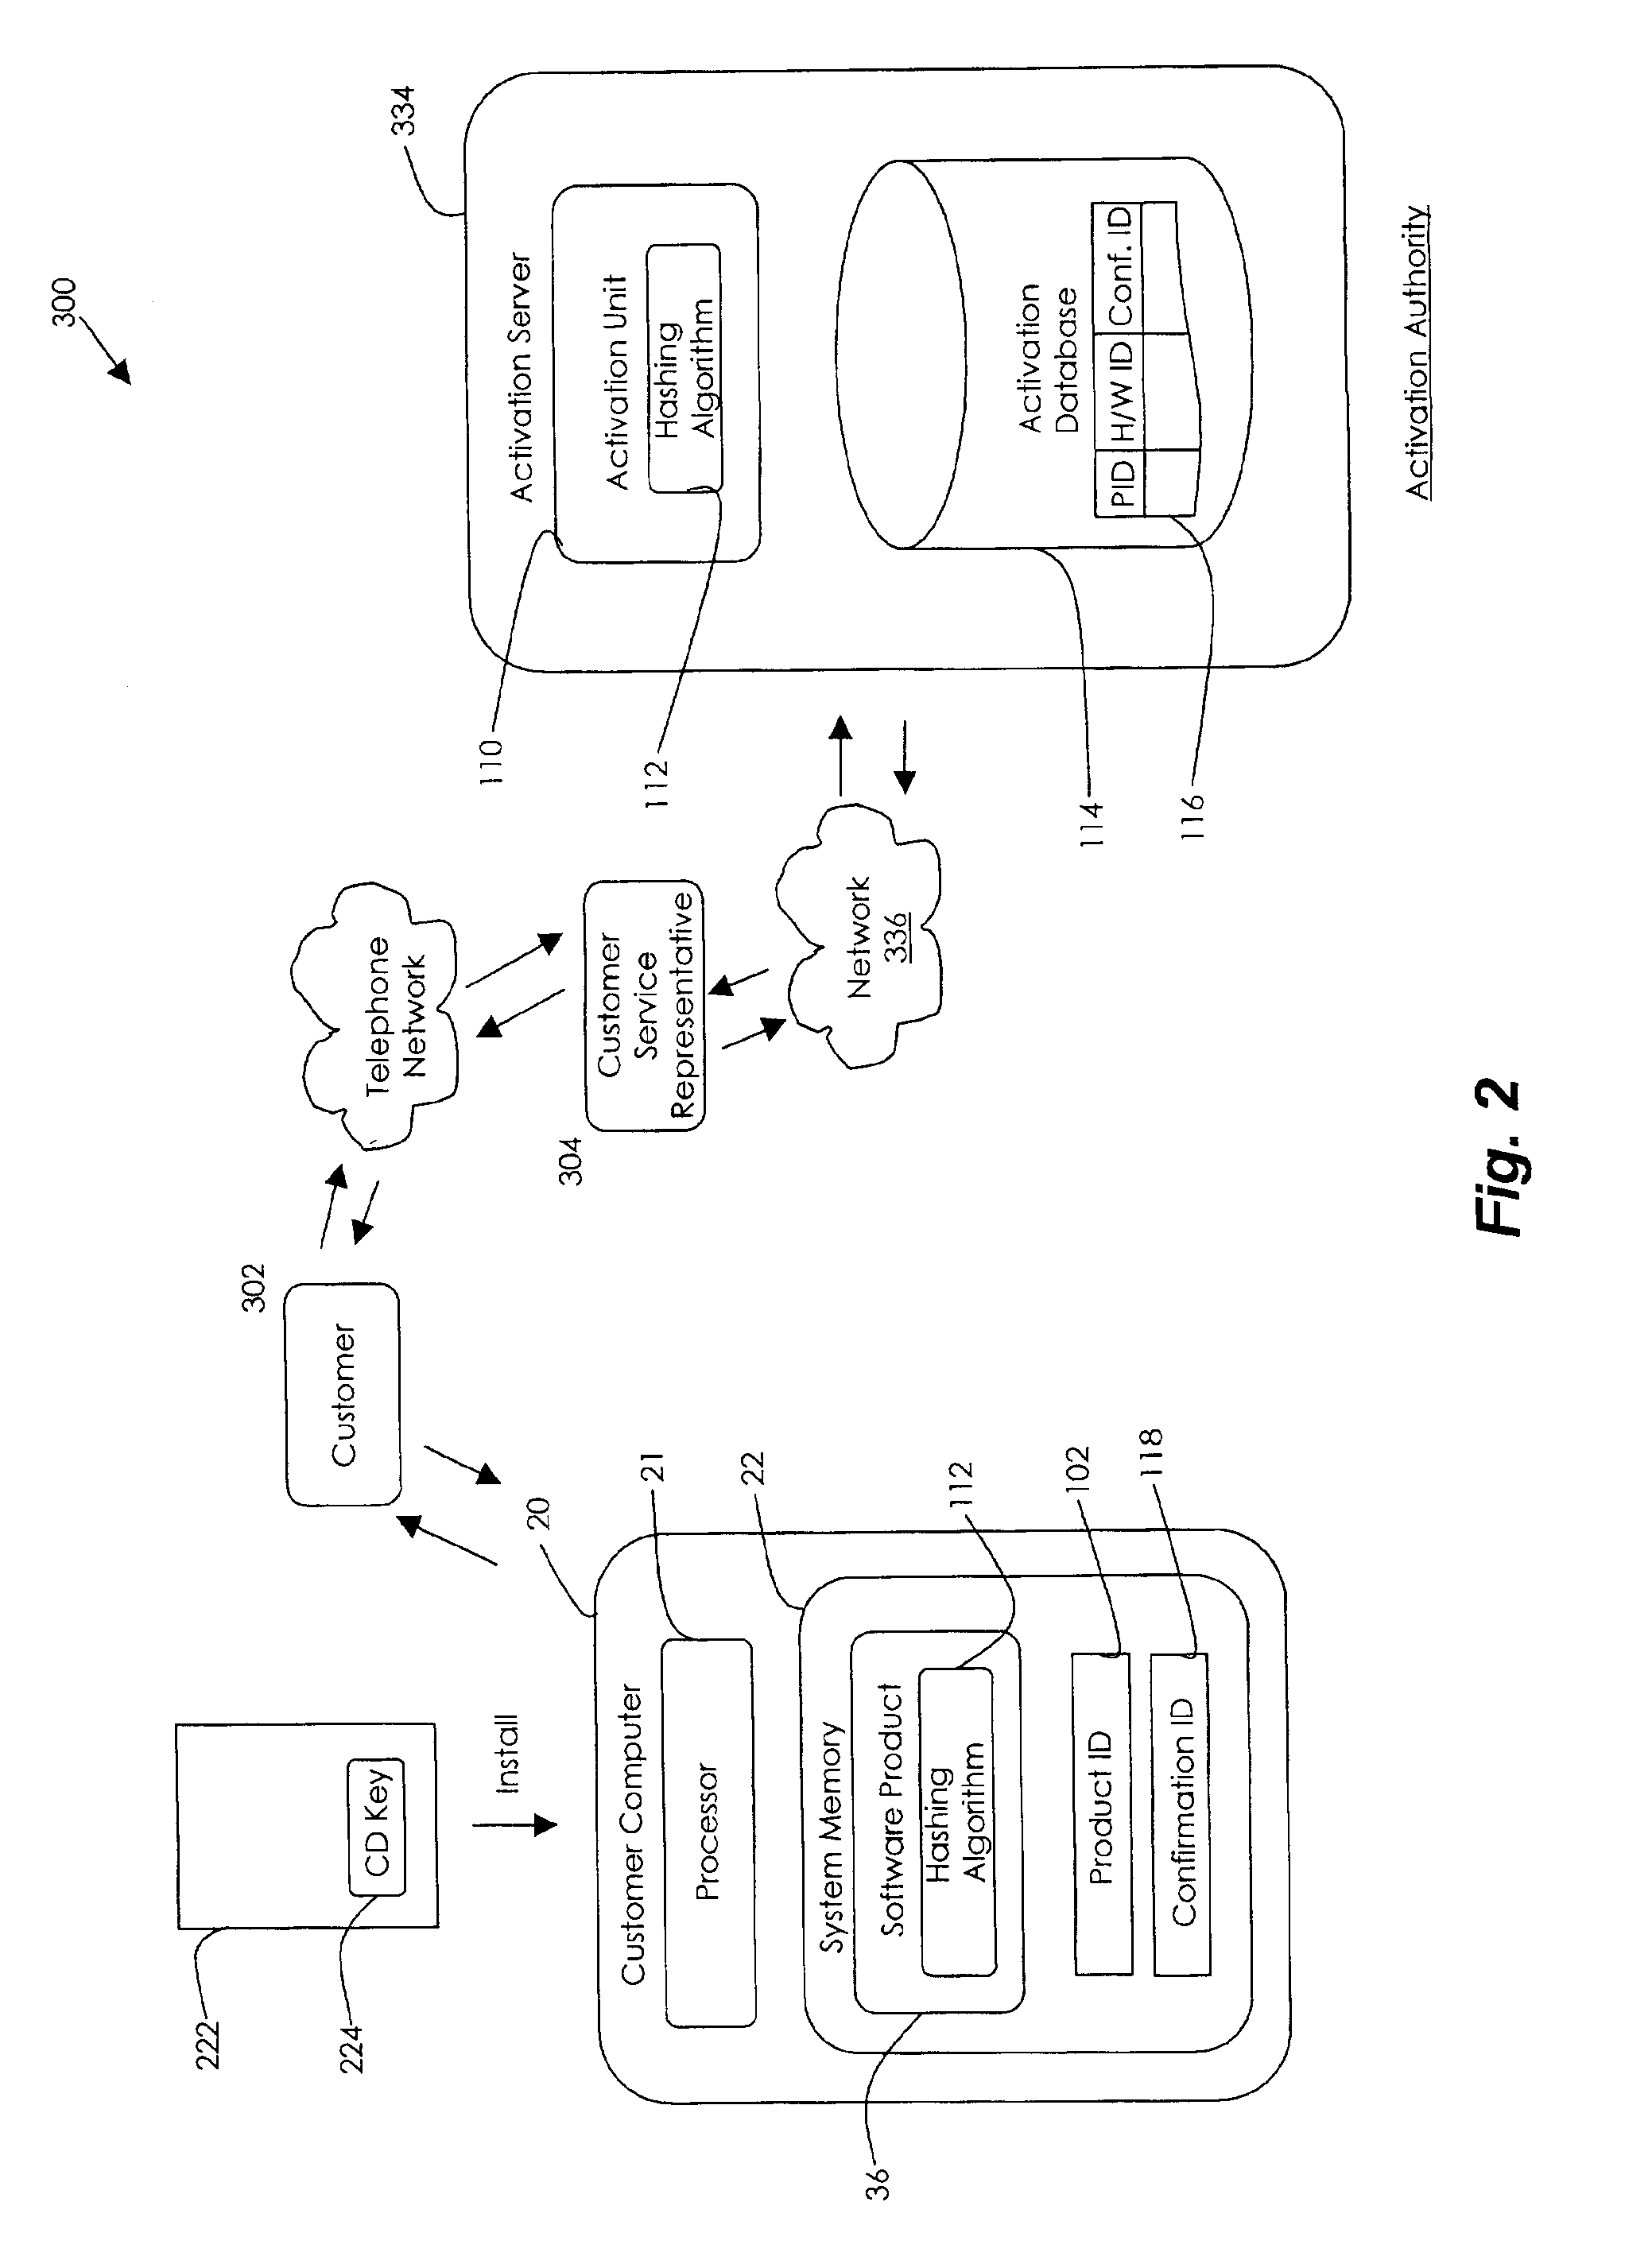 Method and system for licensing a software product